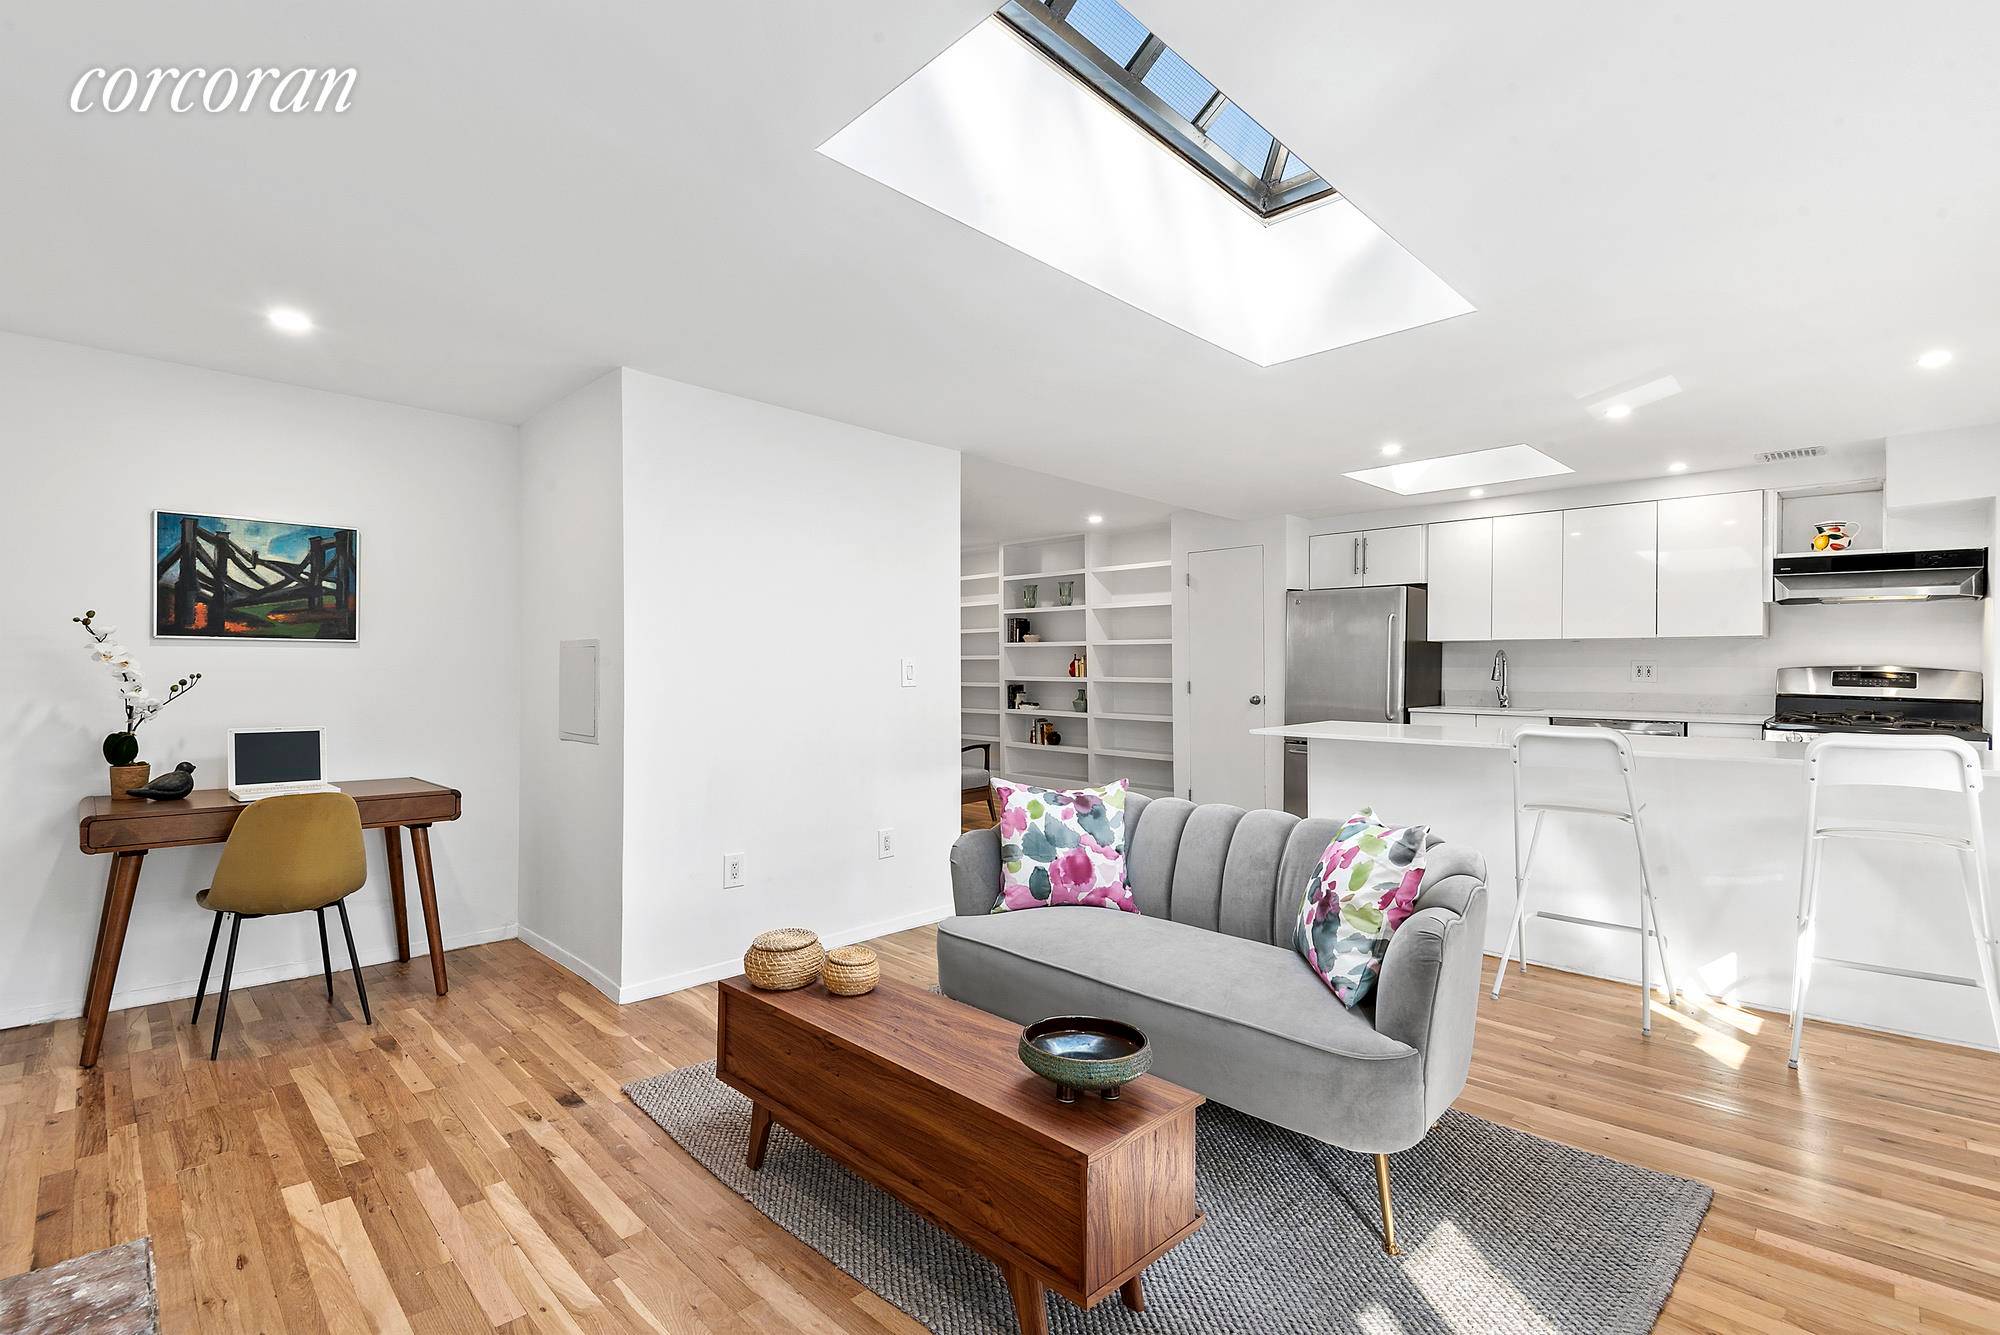 A rare opportunity at the Rosehill Condominium at 85 6th Avenue in prime Park Slope, Brooklyn has come to market 85 6th Avenue Apartment J is a penthouse, unicorn pre ...